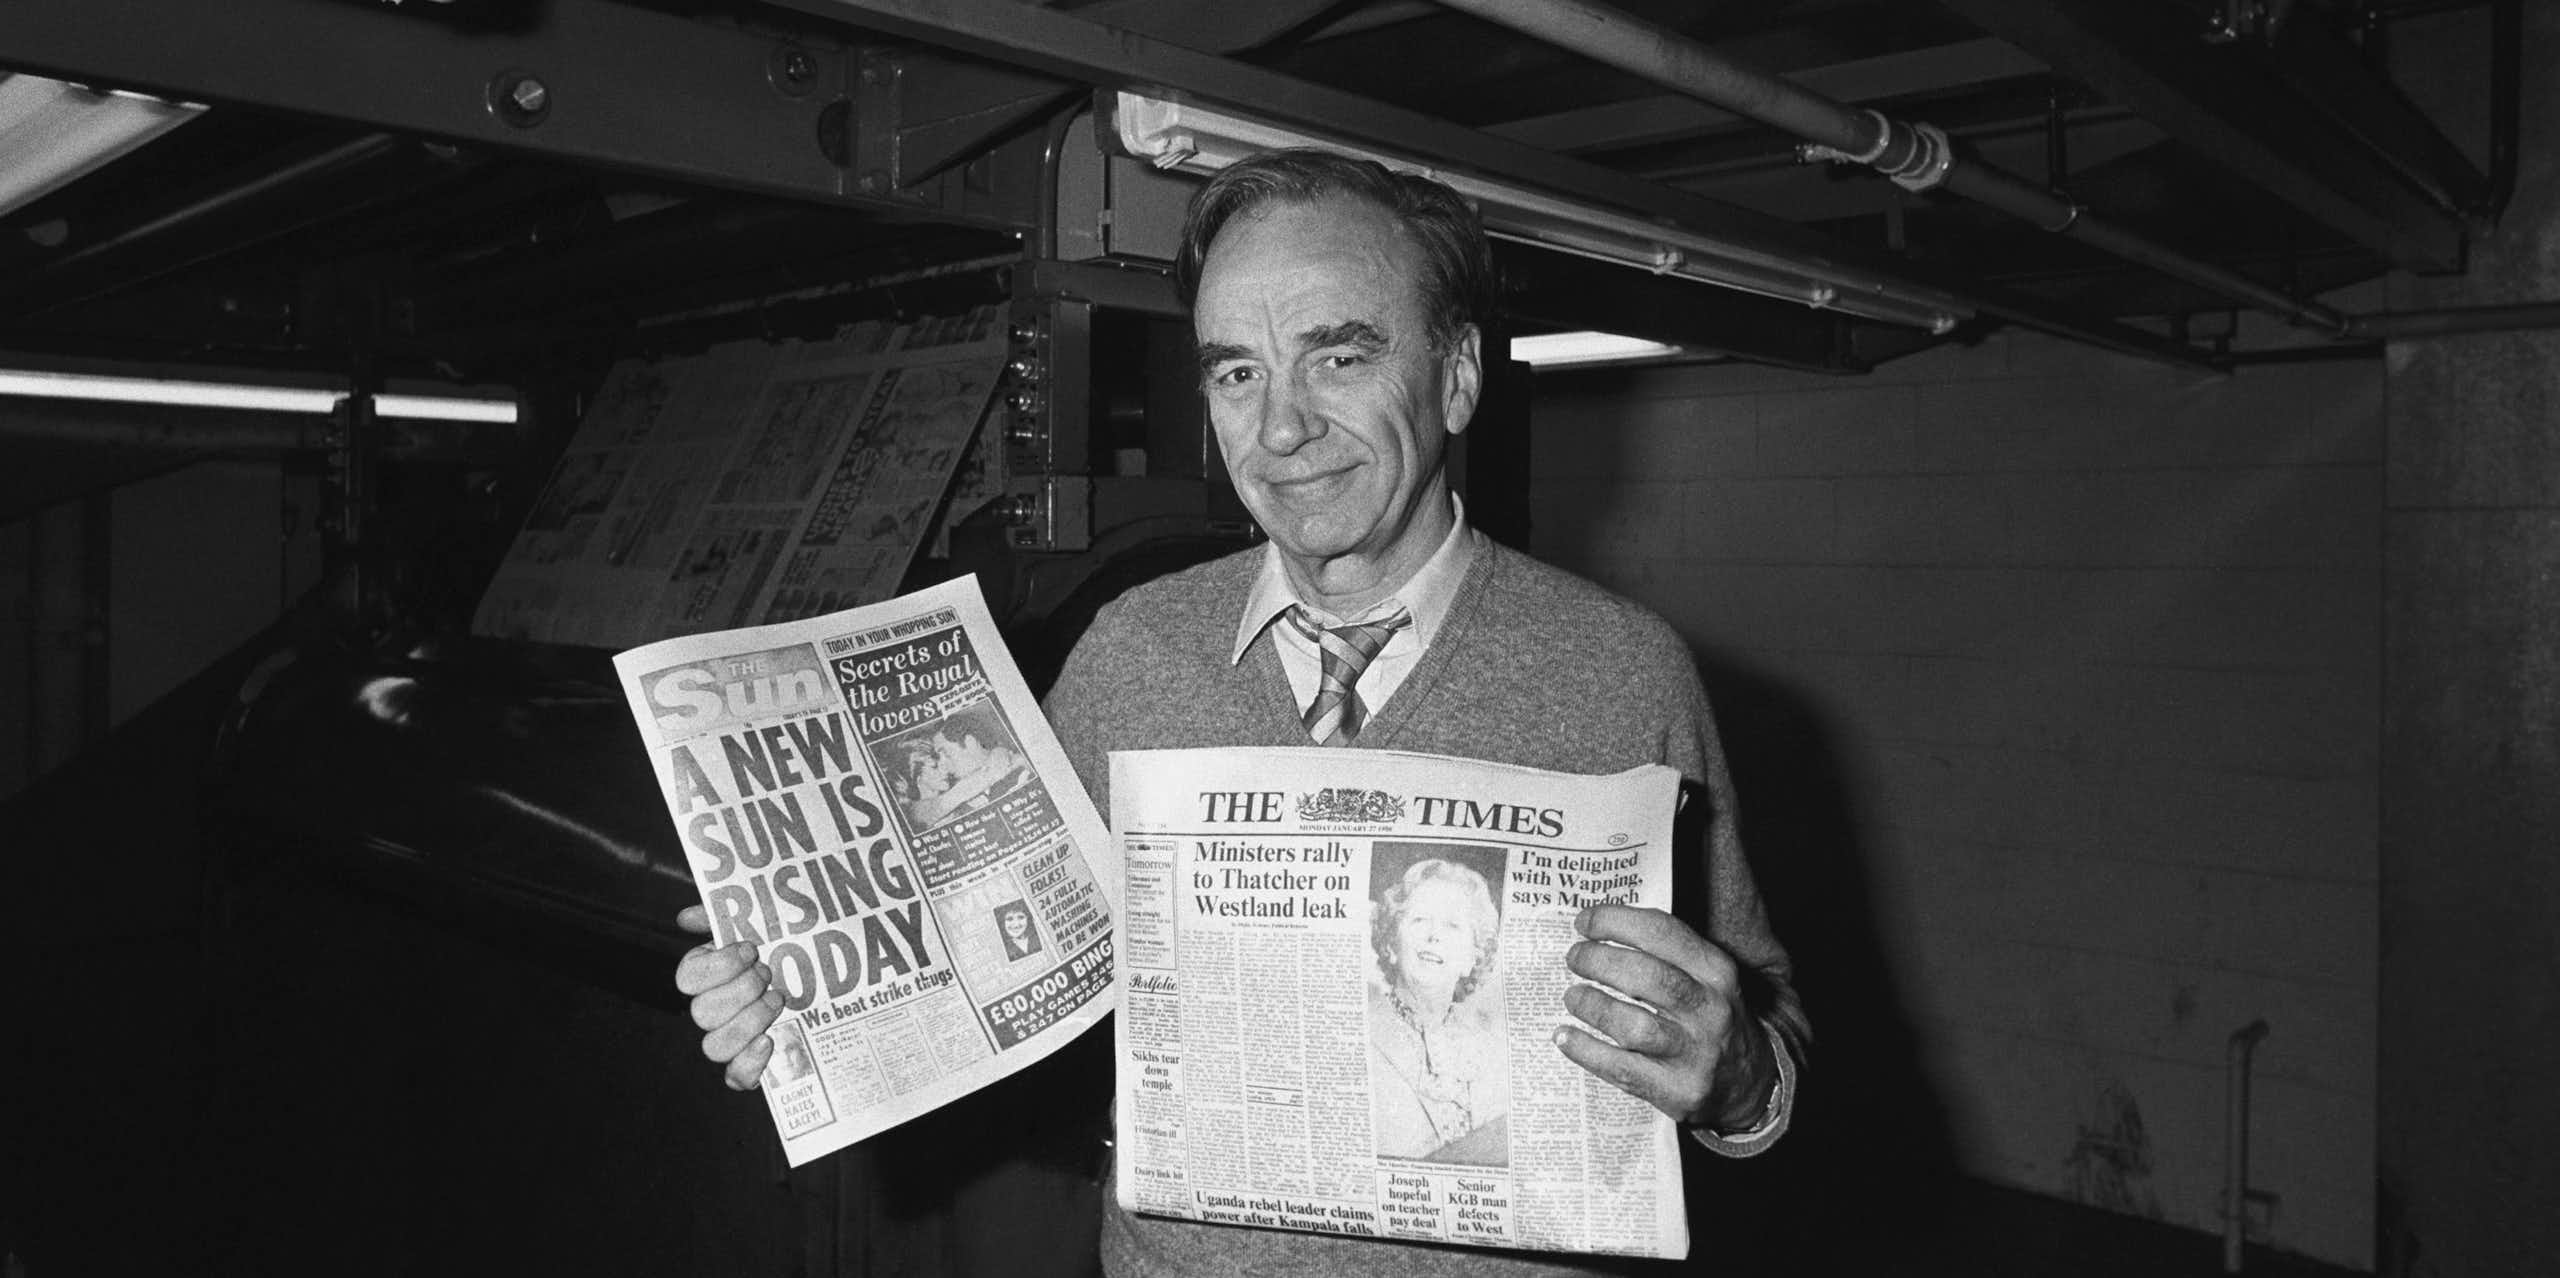 Rupert Murdoch holding newspapers at a print site in 1986.